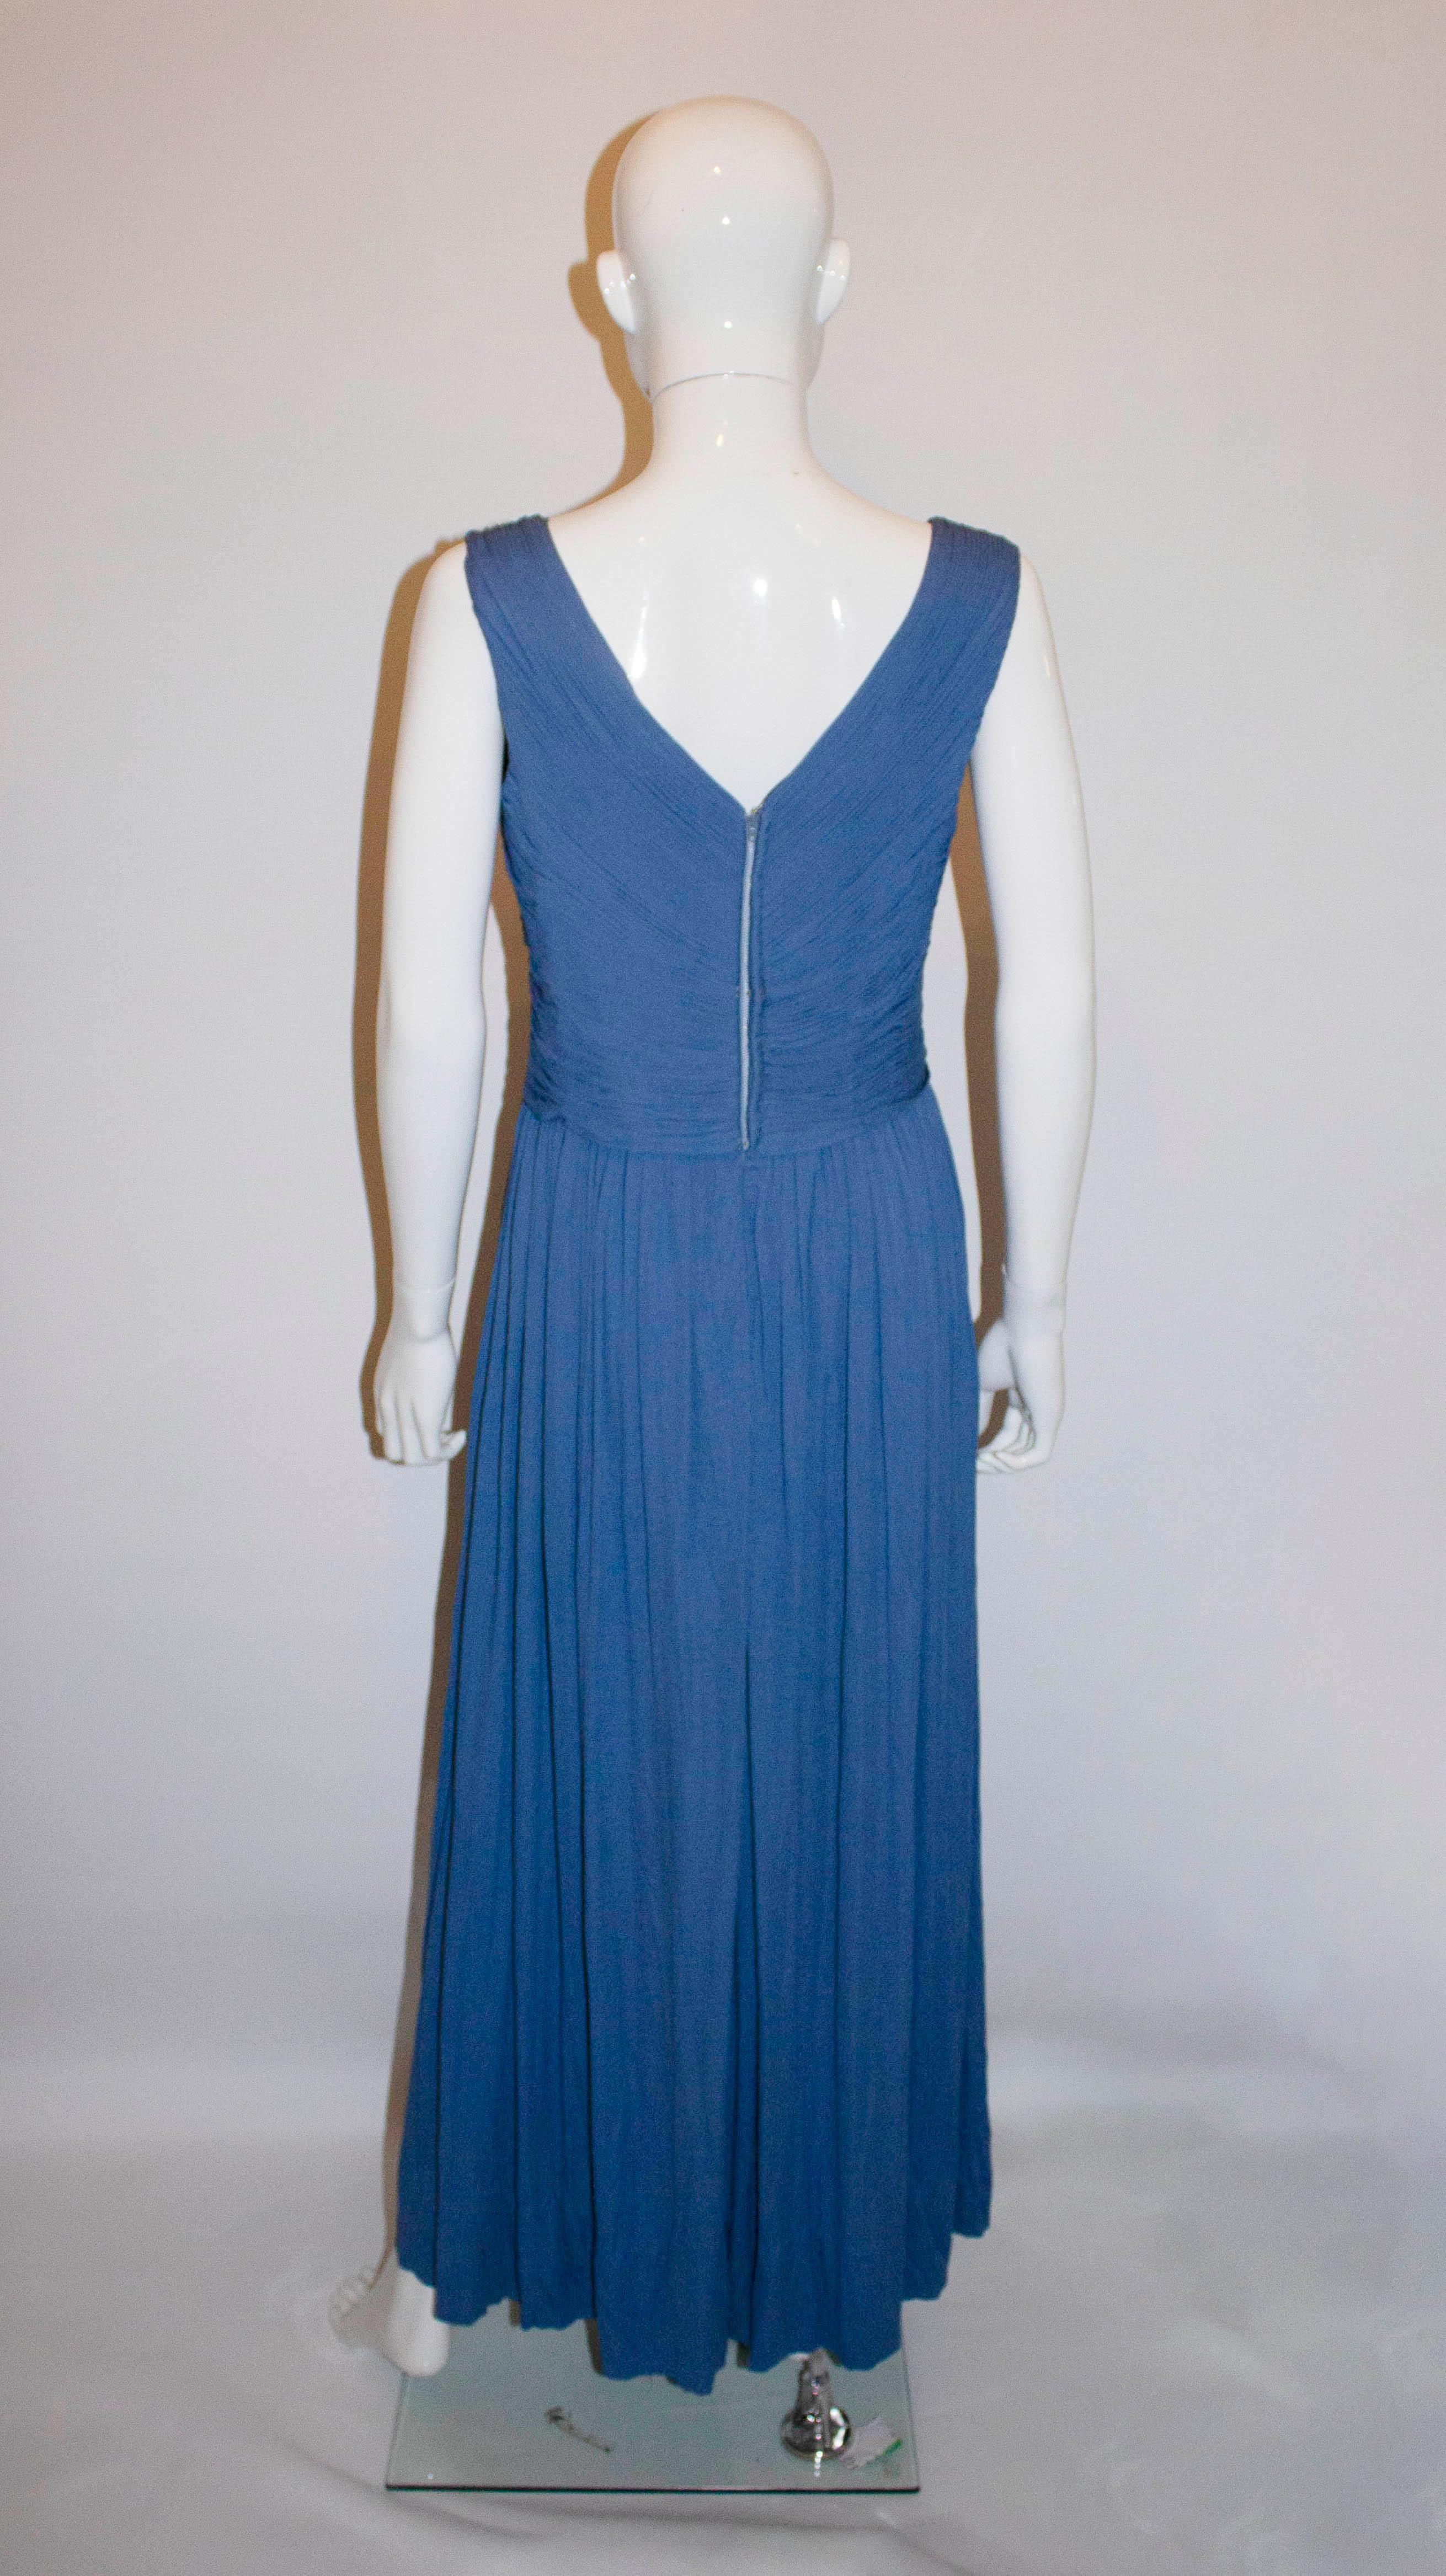 A wonderful jersey drape vintage jersey gown by Ronerg Couture. The dress has a v neckline and backline with plait detail over the bodice,ad gathering at the skirt. 

Measurements: Bust 37'', length 56'' plus a 4 1/2'' hem.